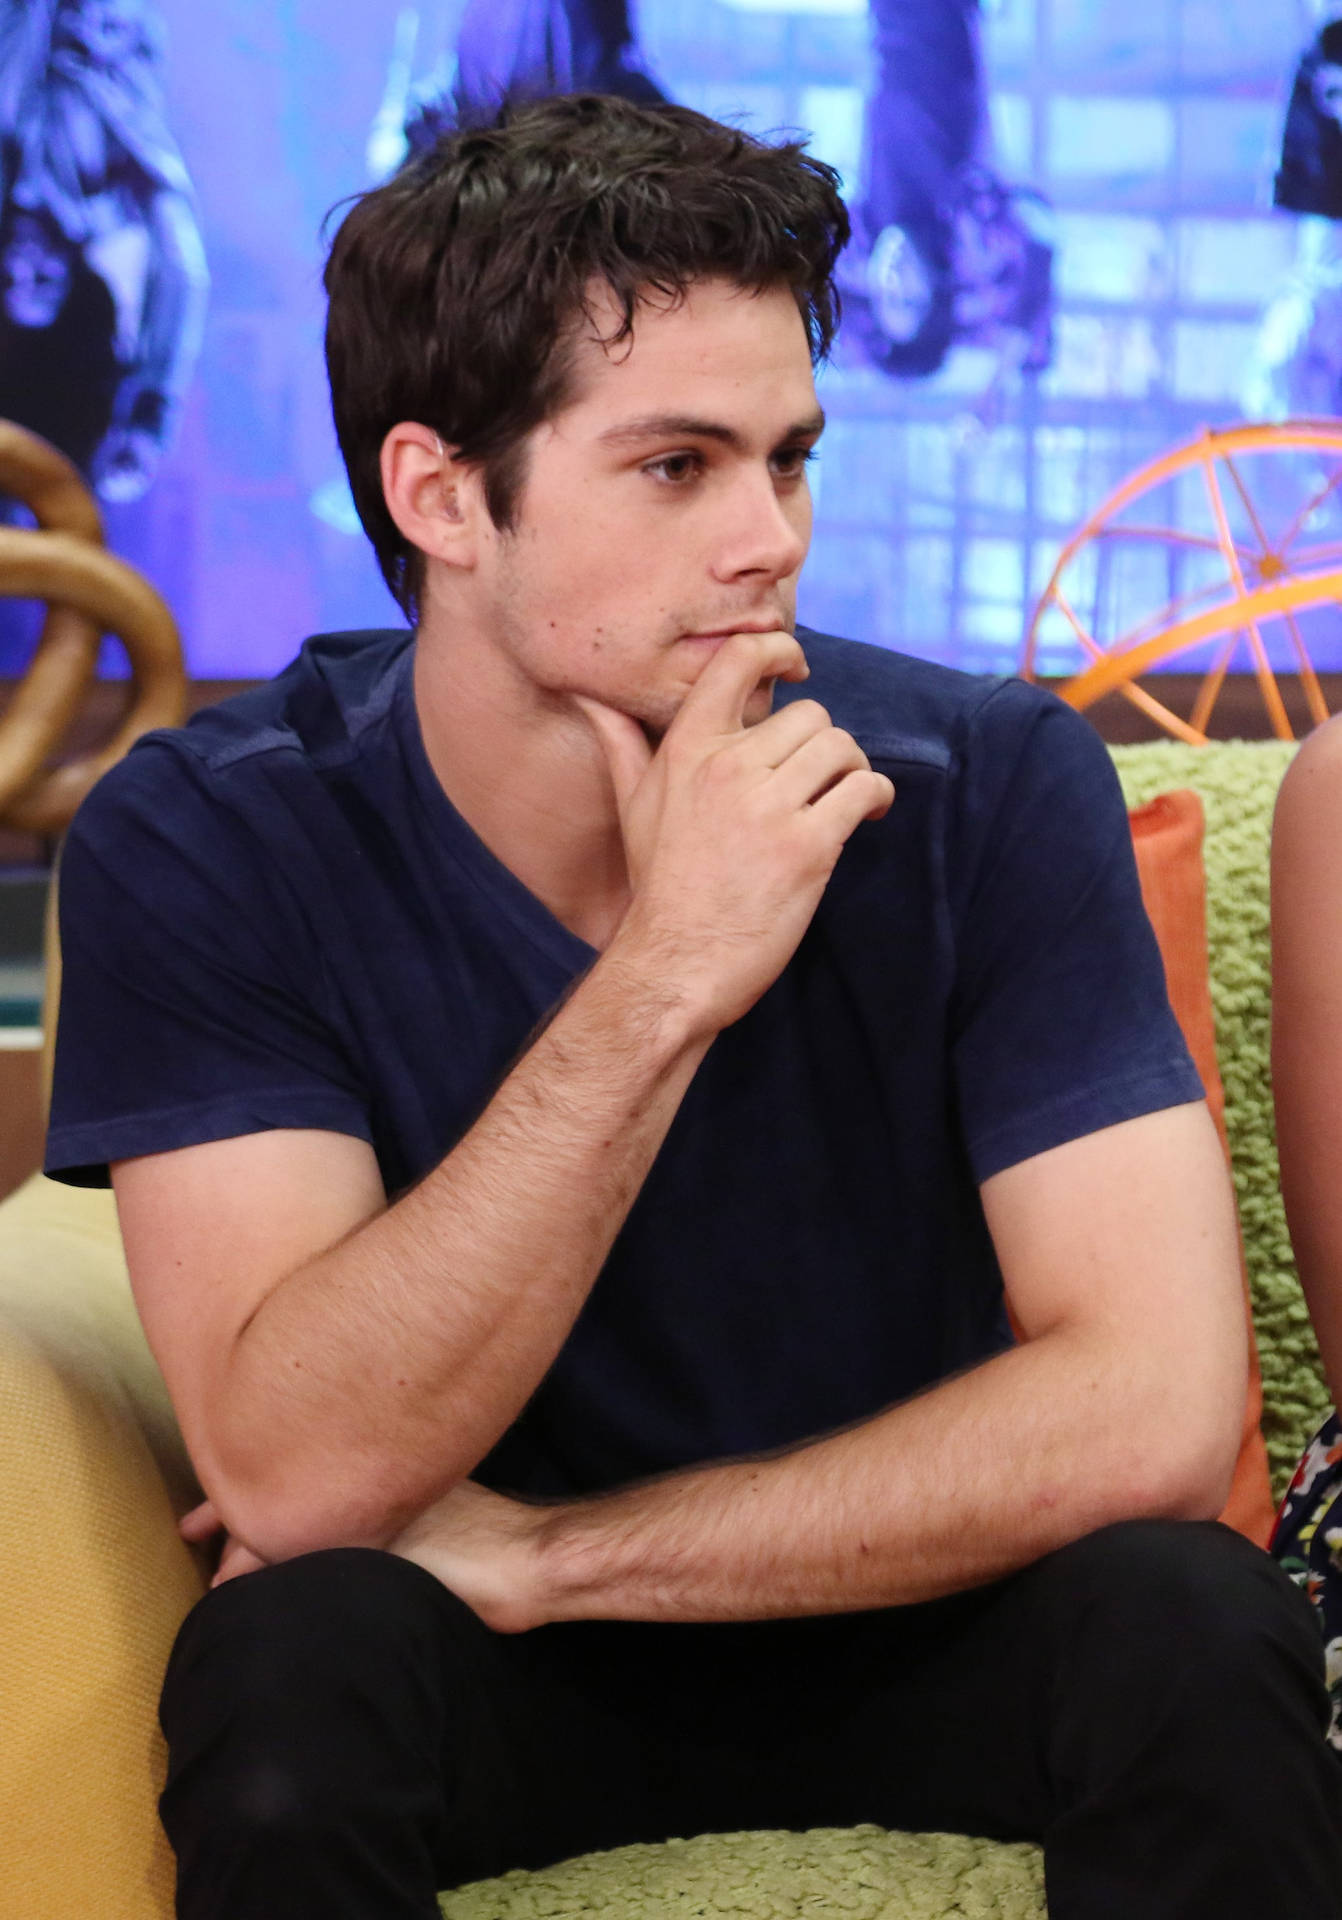 Dylan O'brien In An Engaging Interview Background